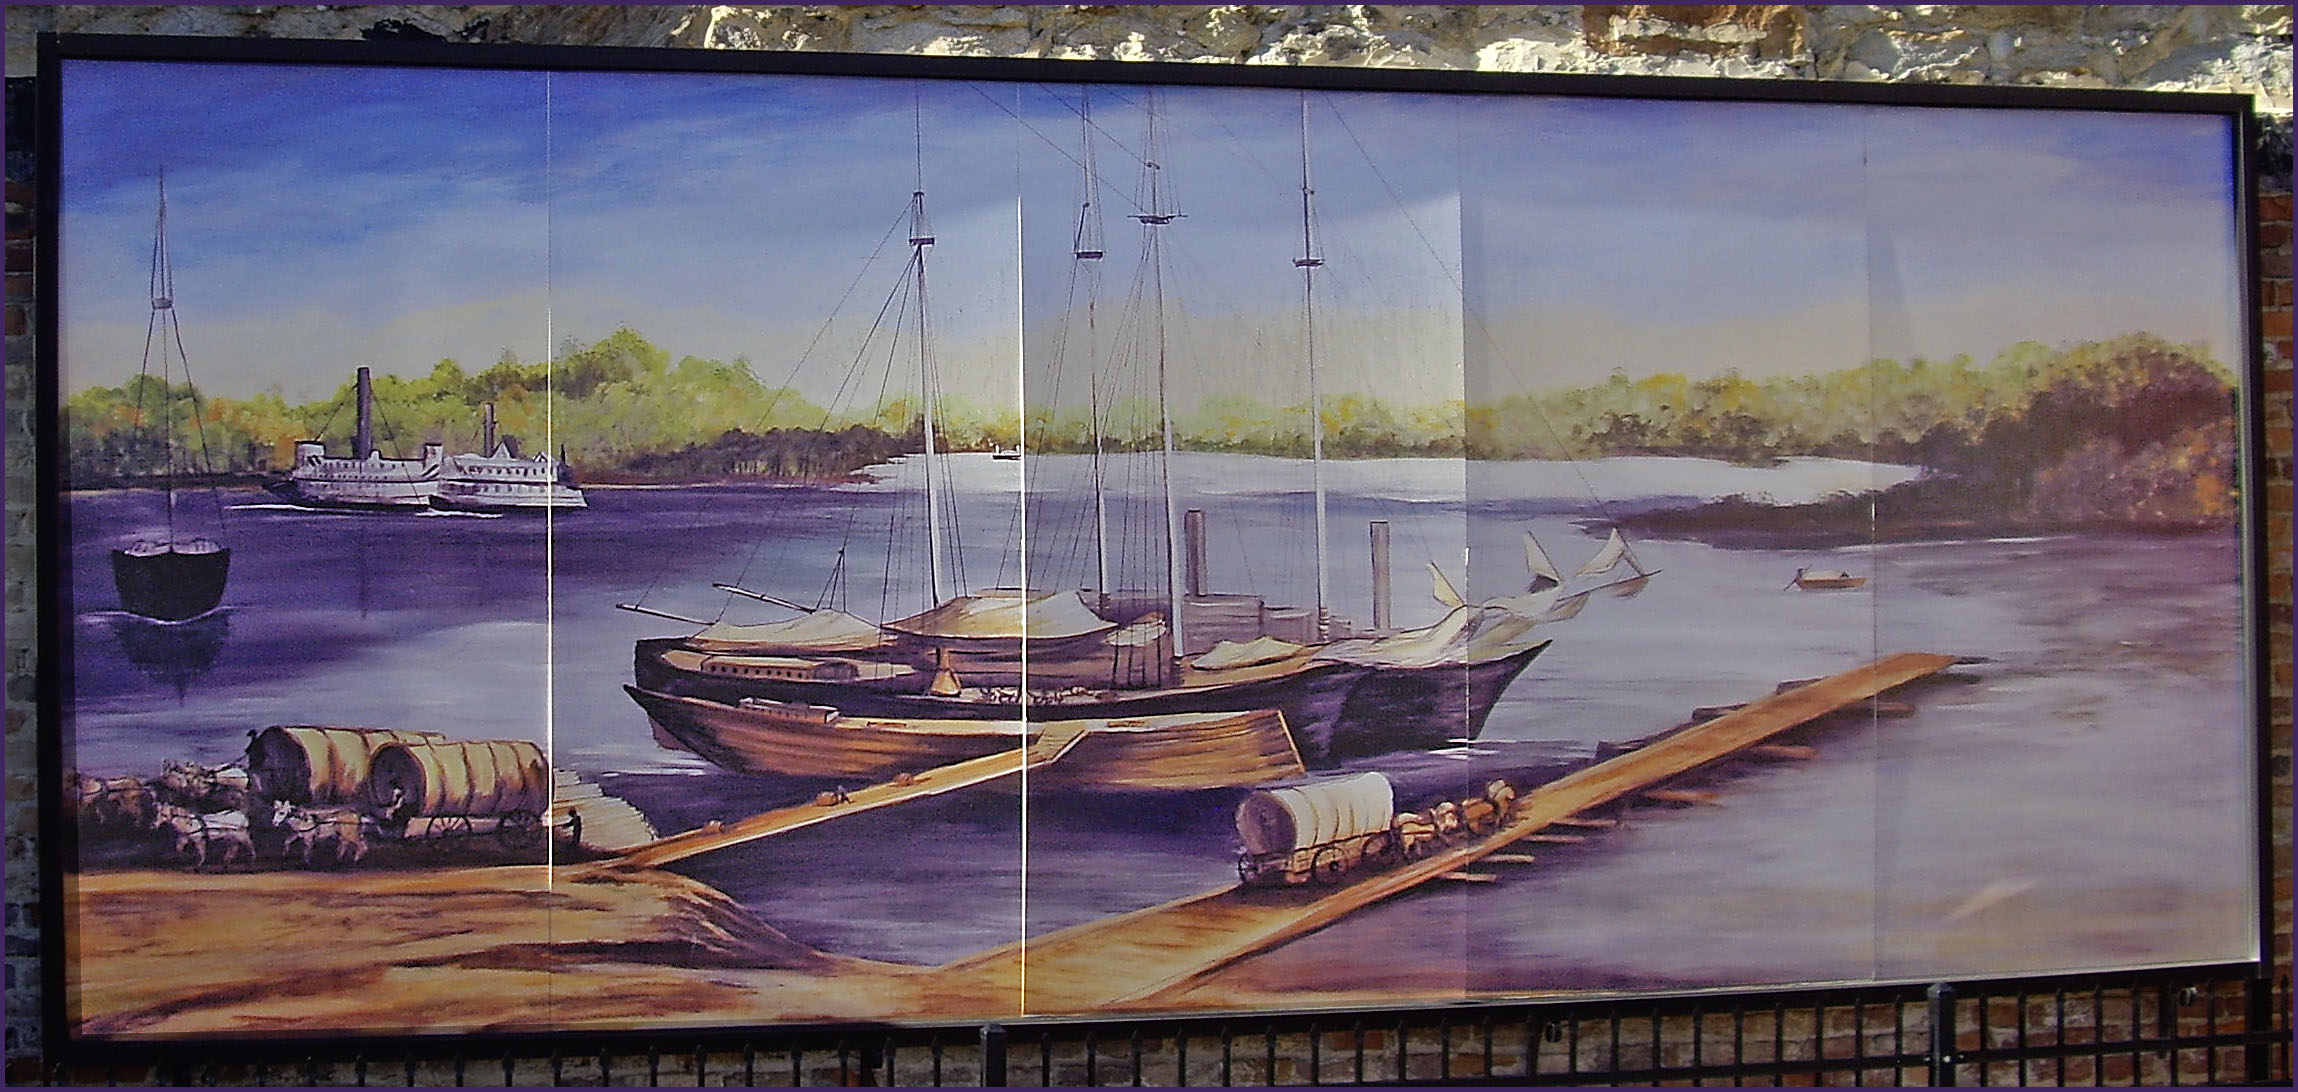 a painting on a wall depicts boats on the water